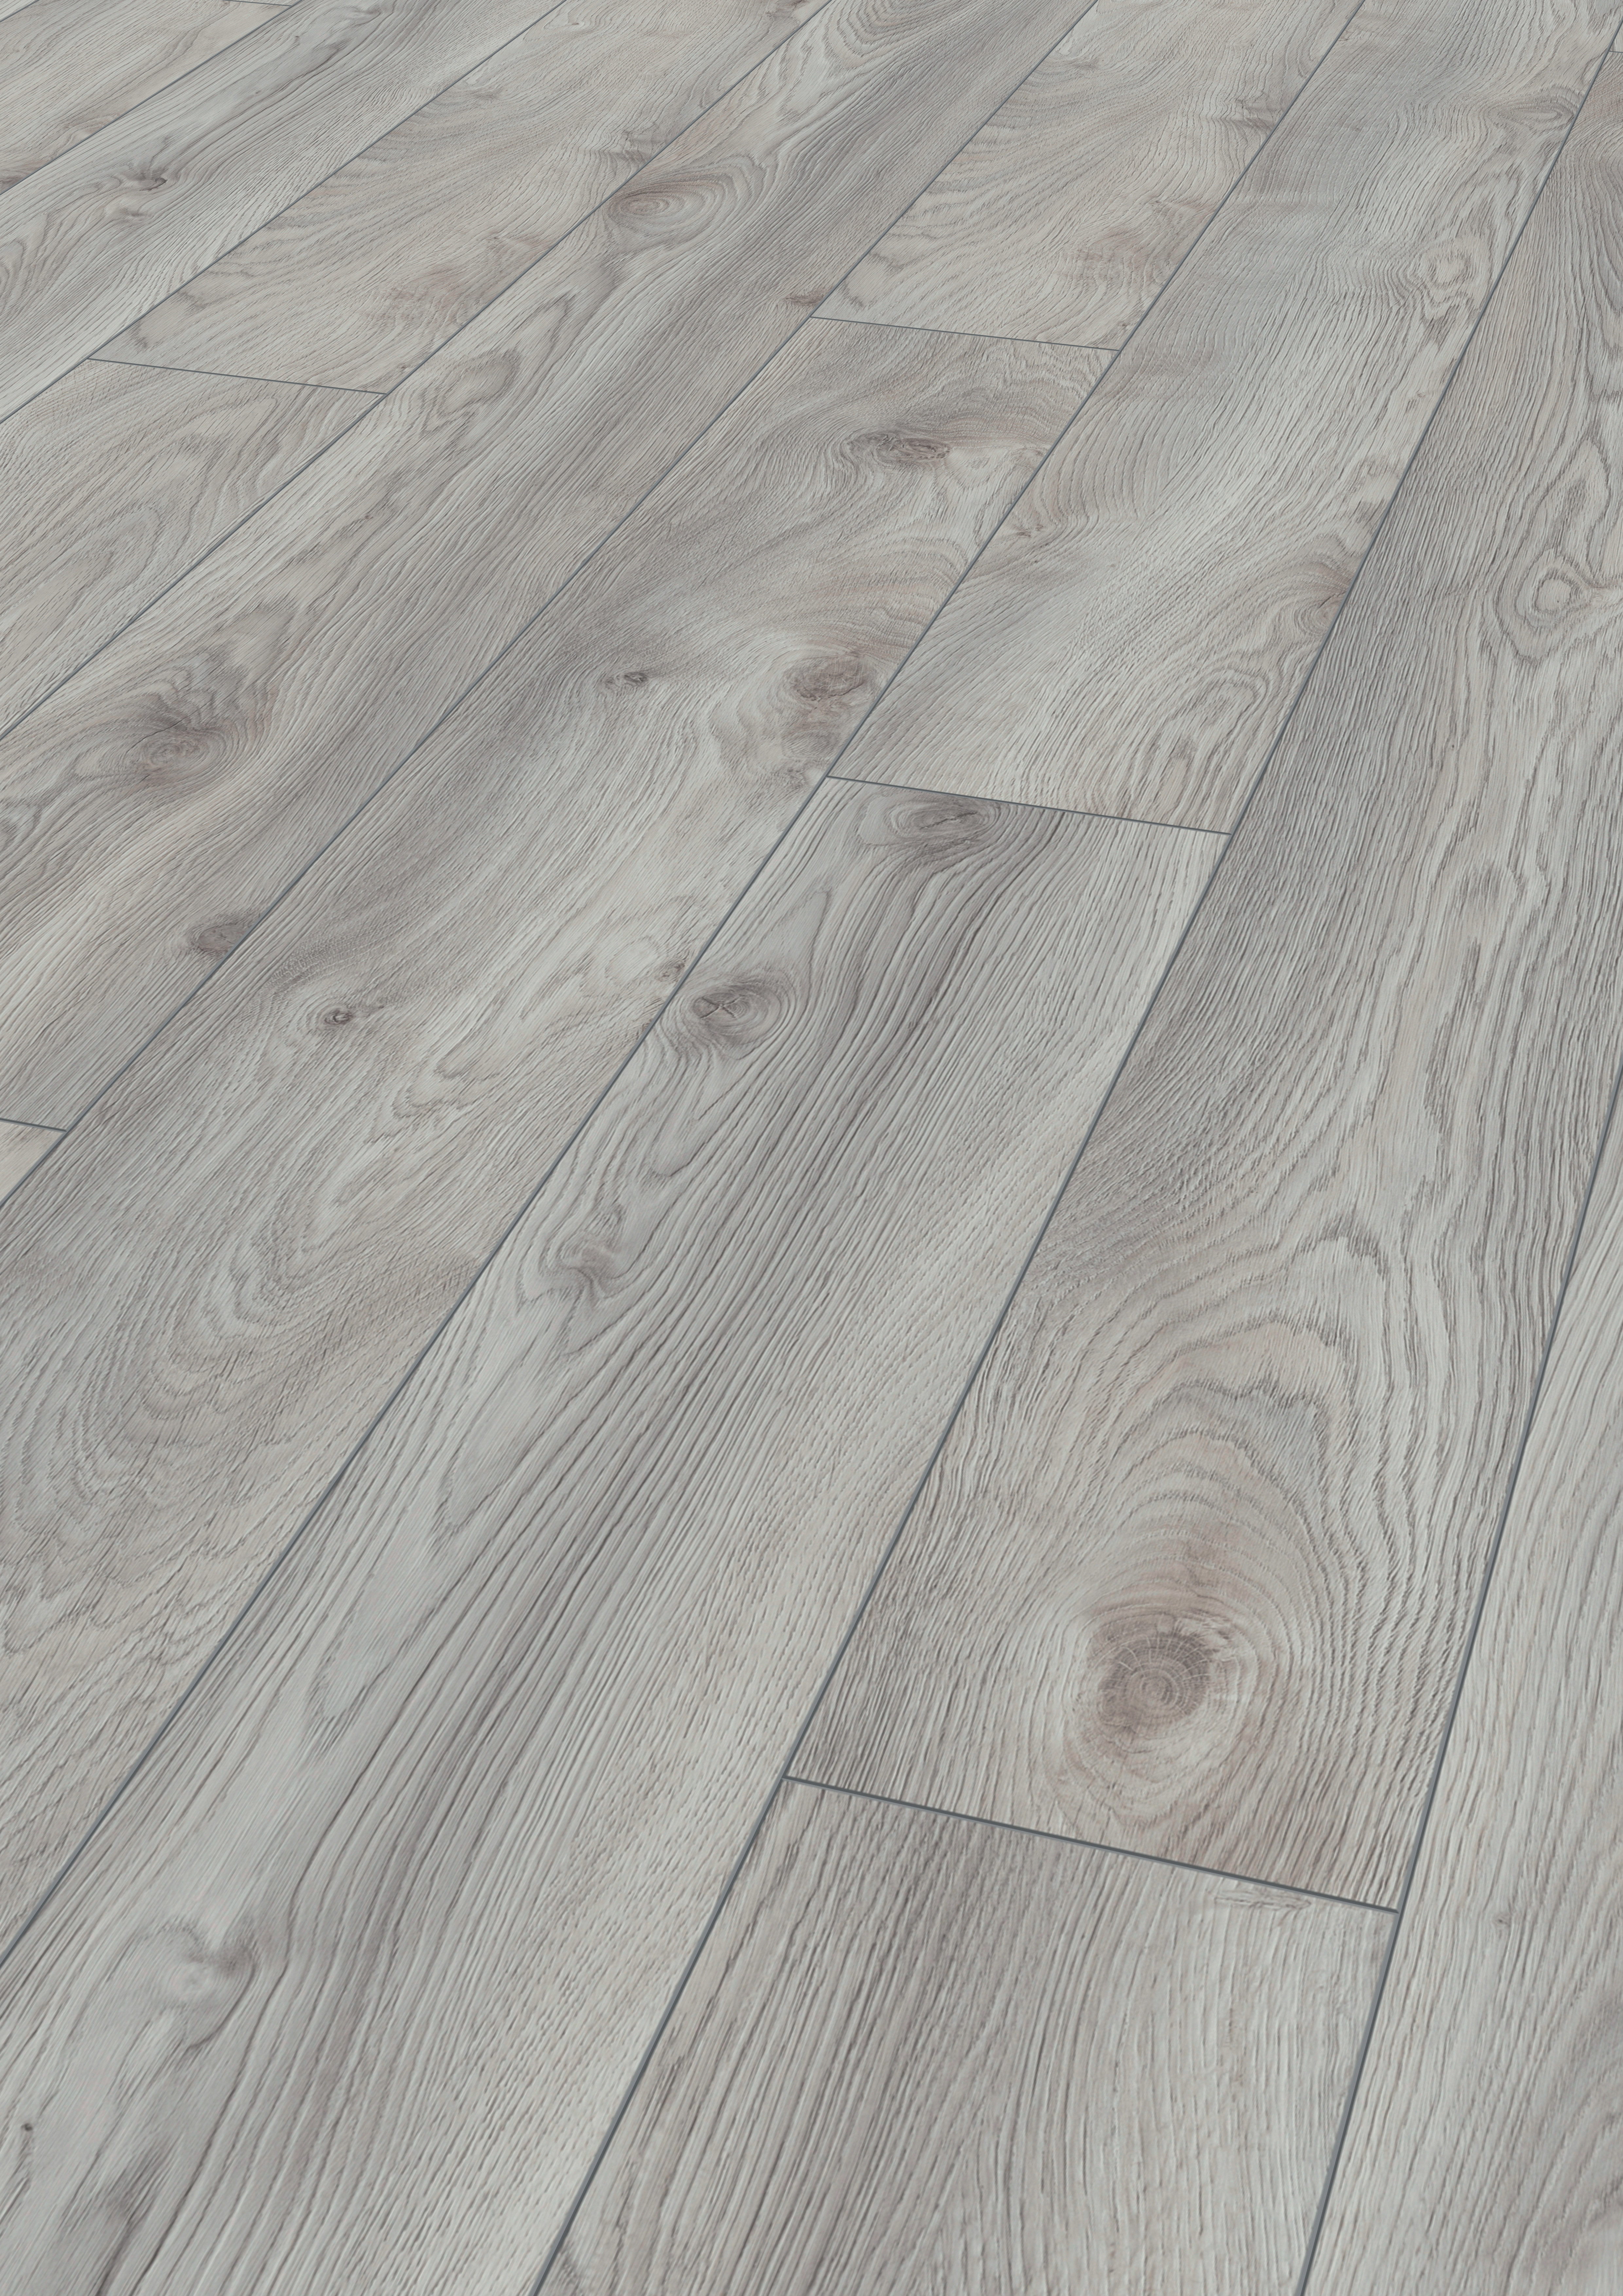 22 Amazing Benefits Of Hardwood Flooring Vs Laminate 2022 free download benefits of hardwood flooring vs laminate of mammut laminate flooring in country house plank style kronotex with regard to download picture amp